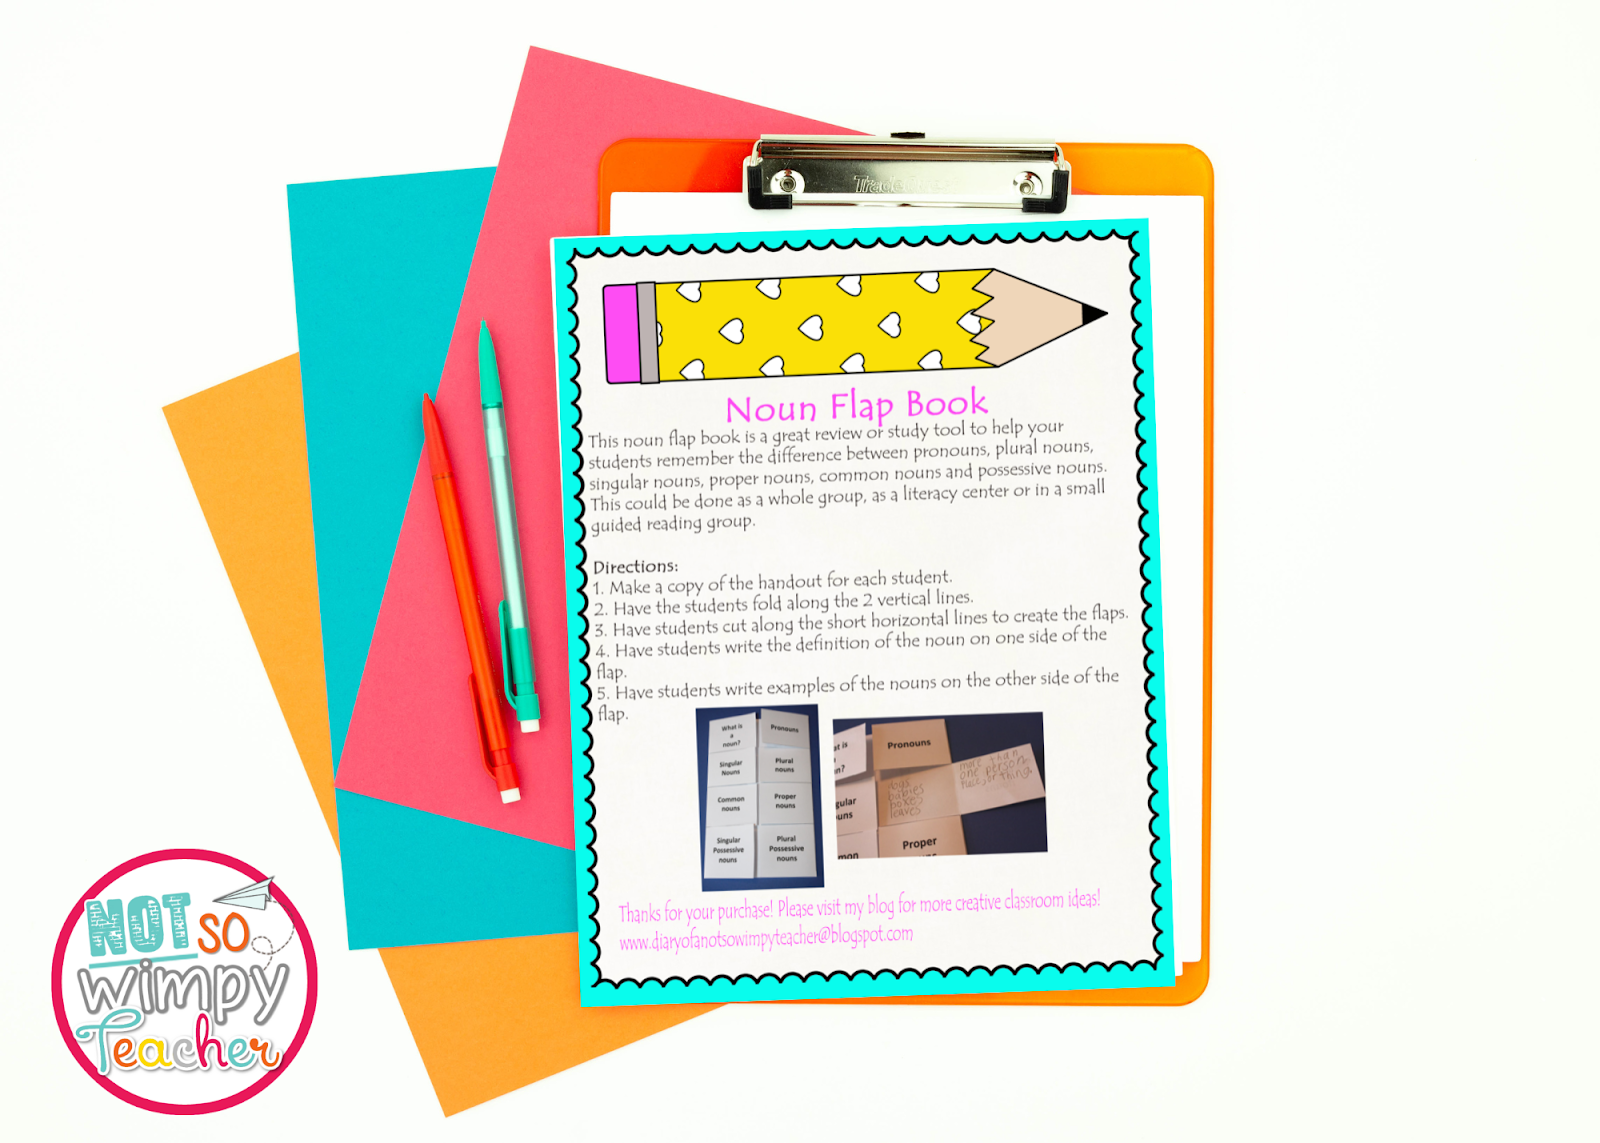 This was my first freebie: a noun flap book. Now, we have tons of amazing freebies and teacher resources available. 